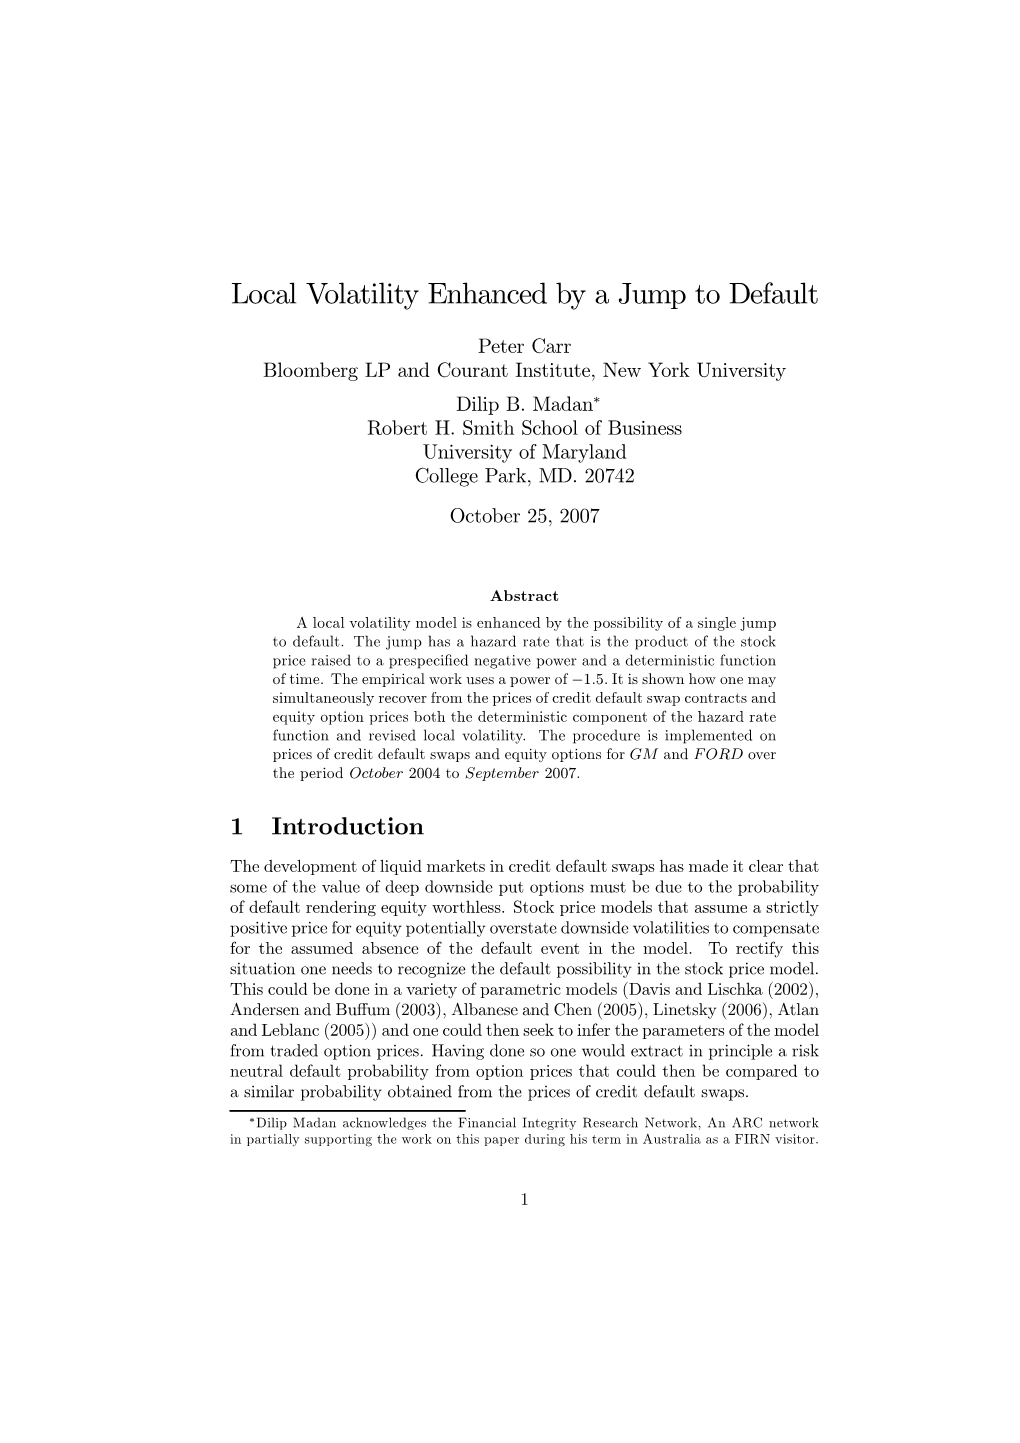 Local Volatility Enhanced by a Jump to Default (PDF)